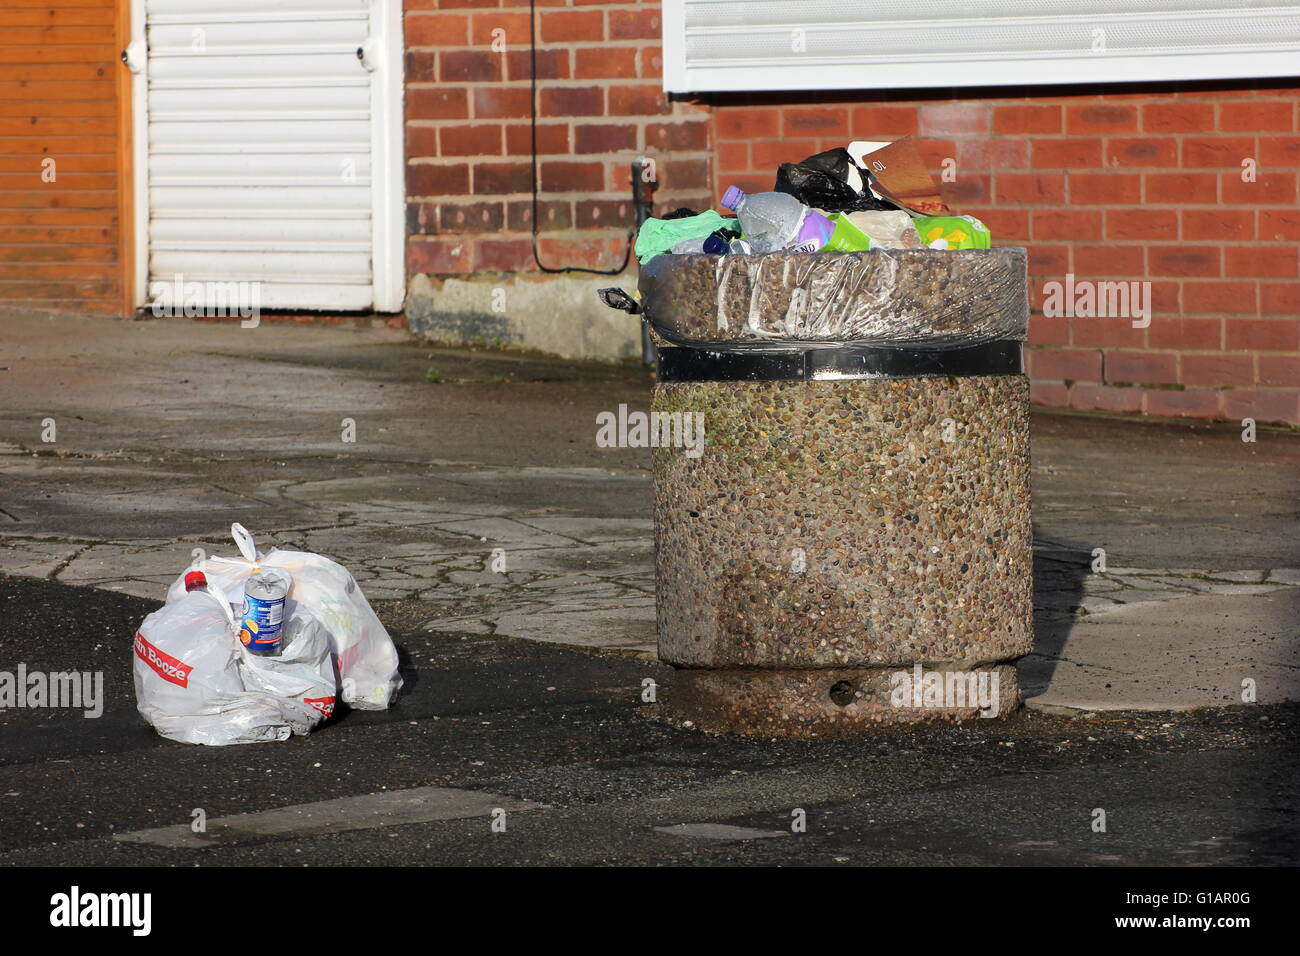 Over flowing public rubbish bin on a back street in a Stockport suburb - so full bags of rubbish are left next to the bin Stock Photo